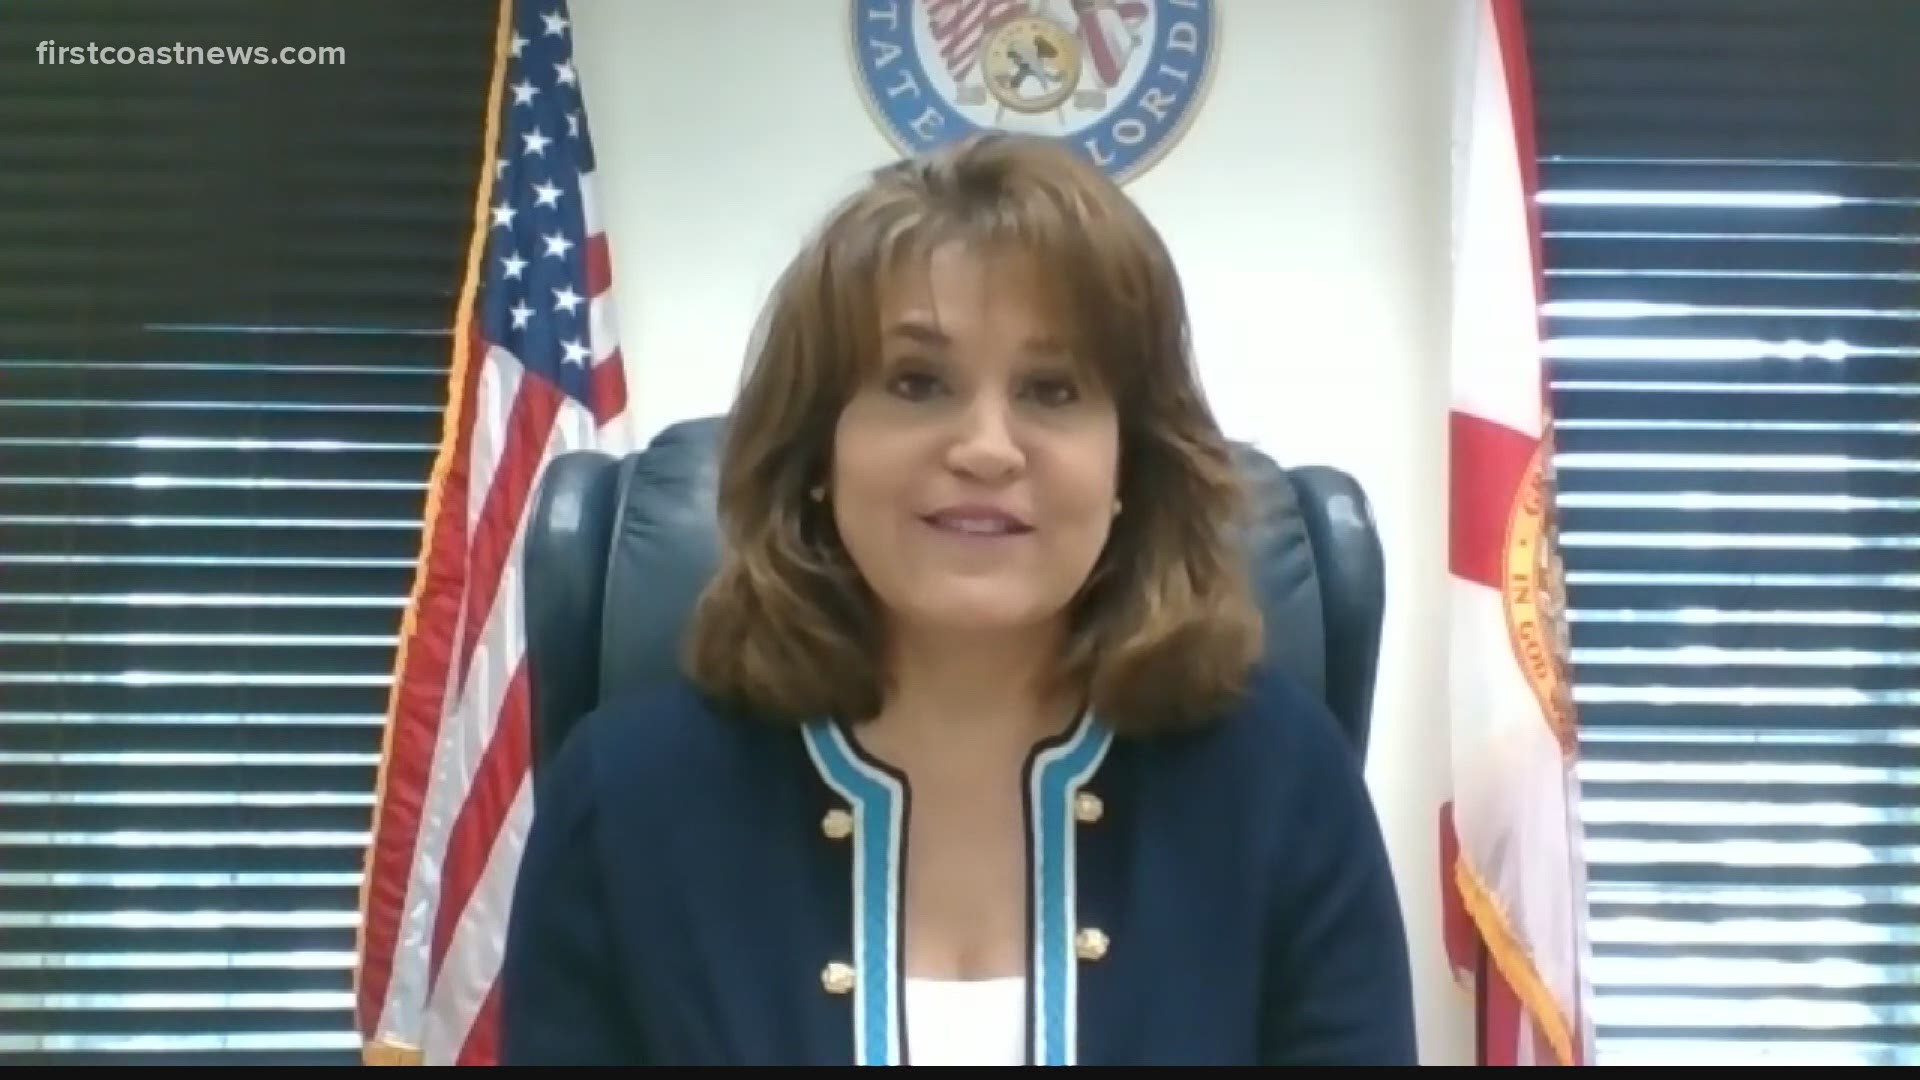 Sen. Annette Taddeo drafted a bill that would make the weekly benefit amount 1/26th of the total wages earned in the last quarter, and up the number of weeks to 26.